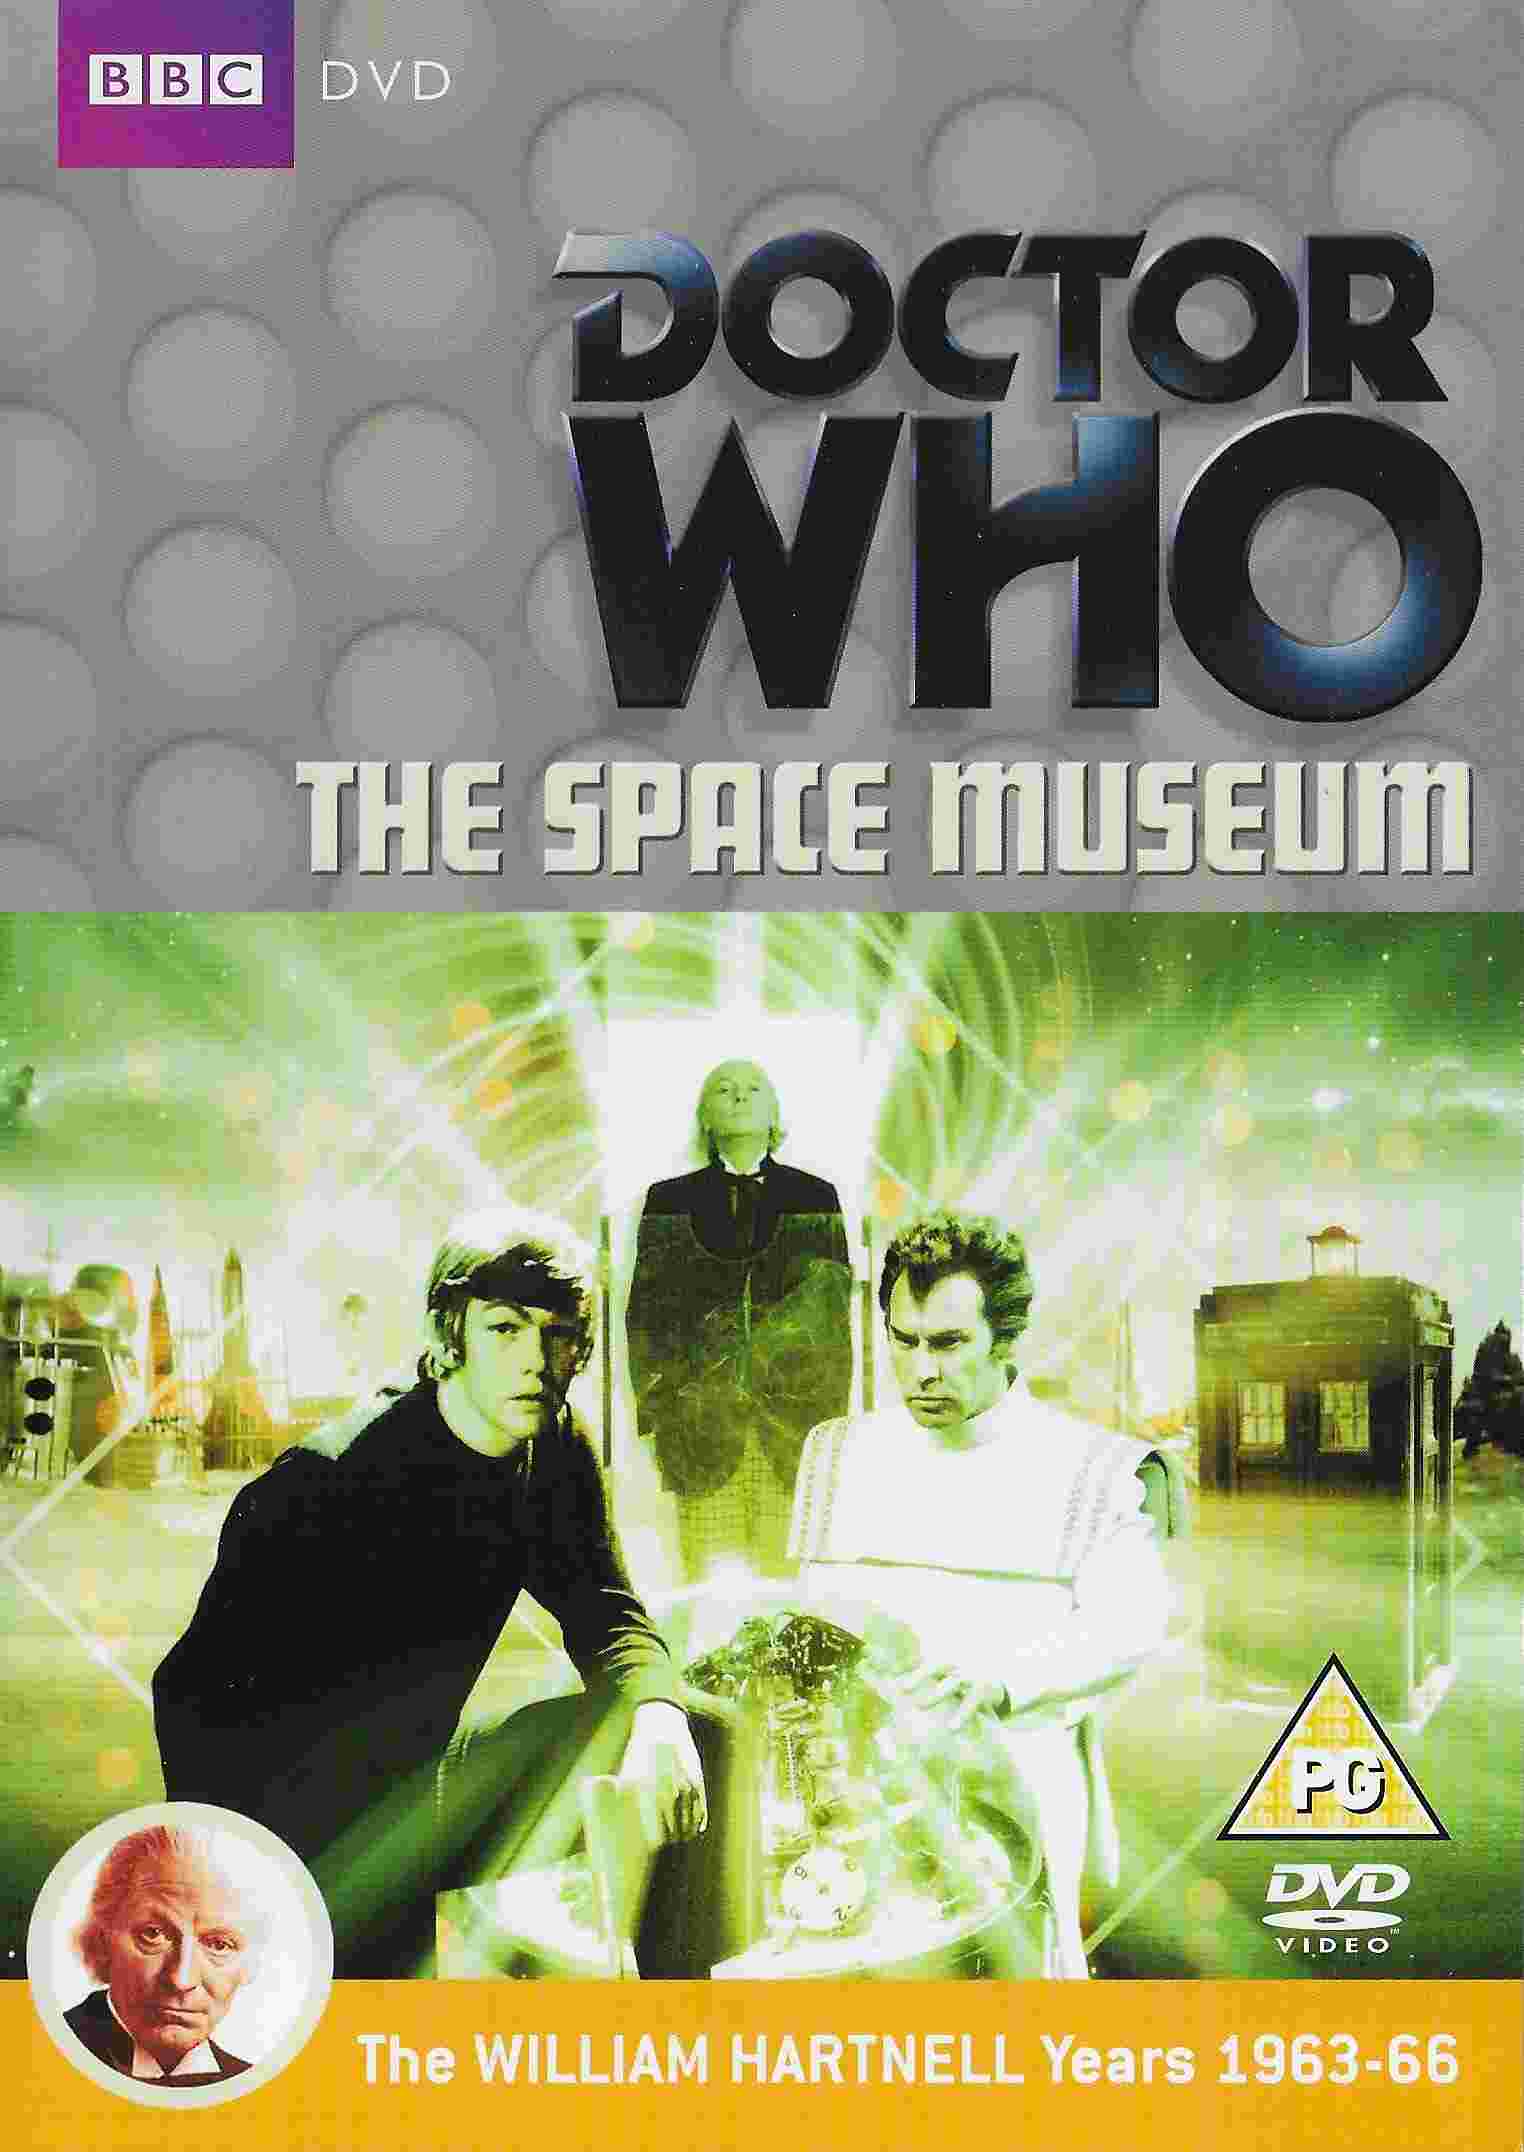 Picture of BBCDVD 2809A Doctor Who - The space museum by artist Glyn Jones from the BBC records and Tapes library